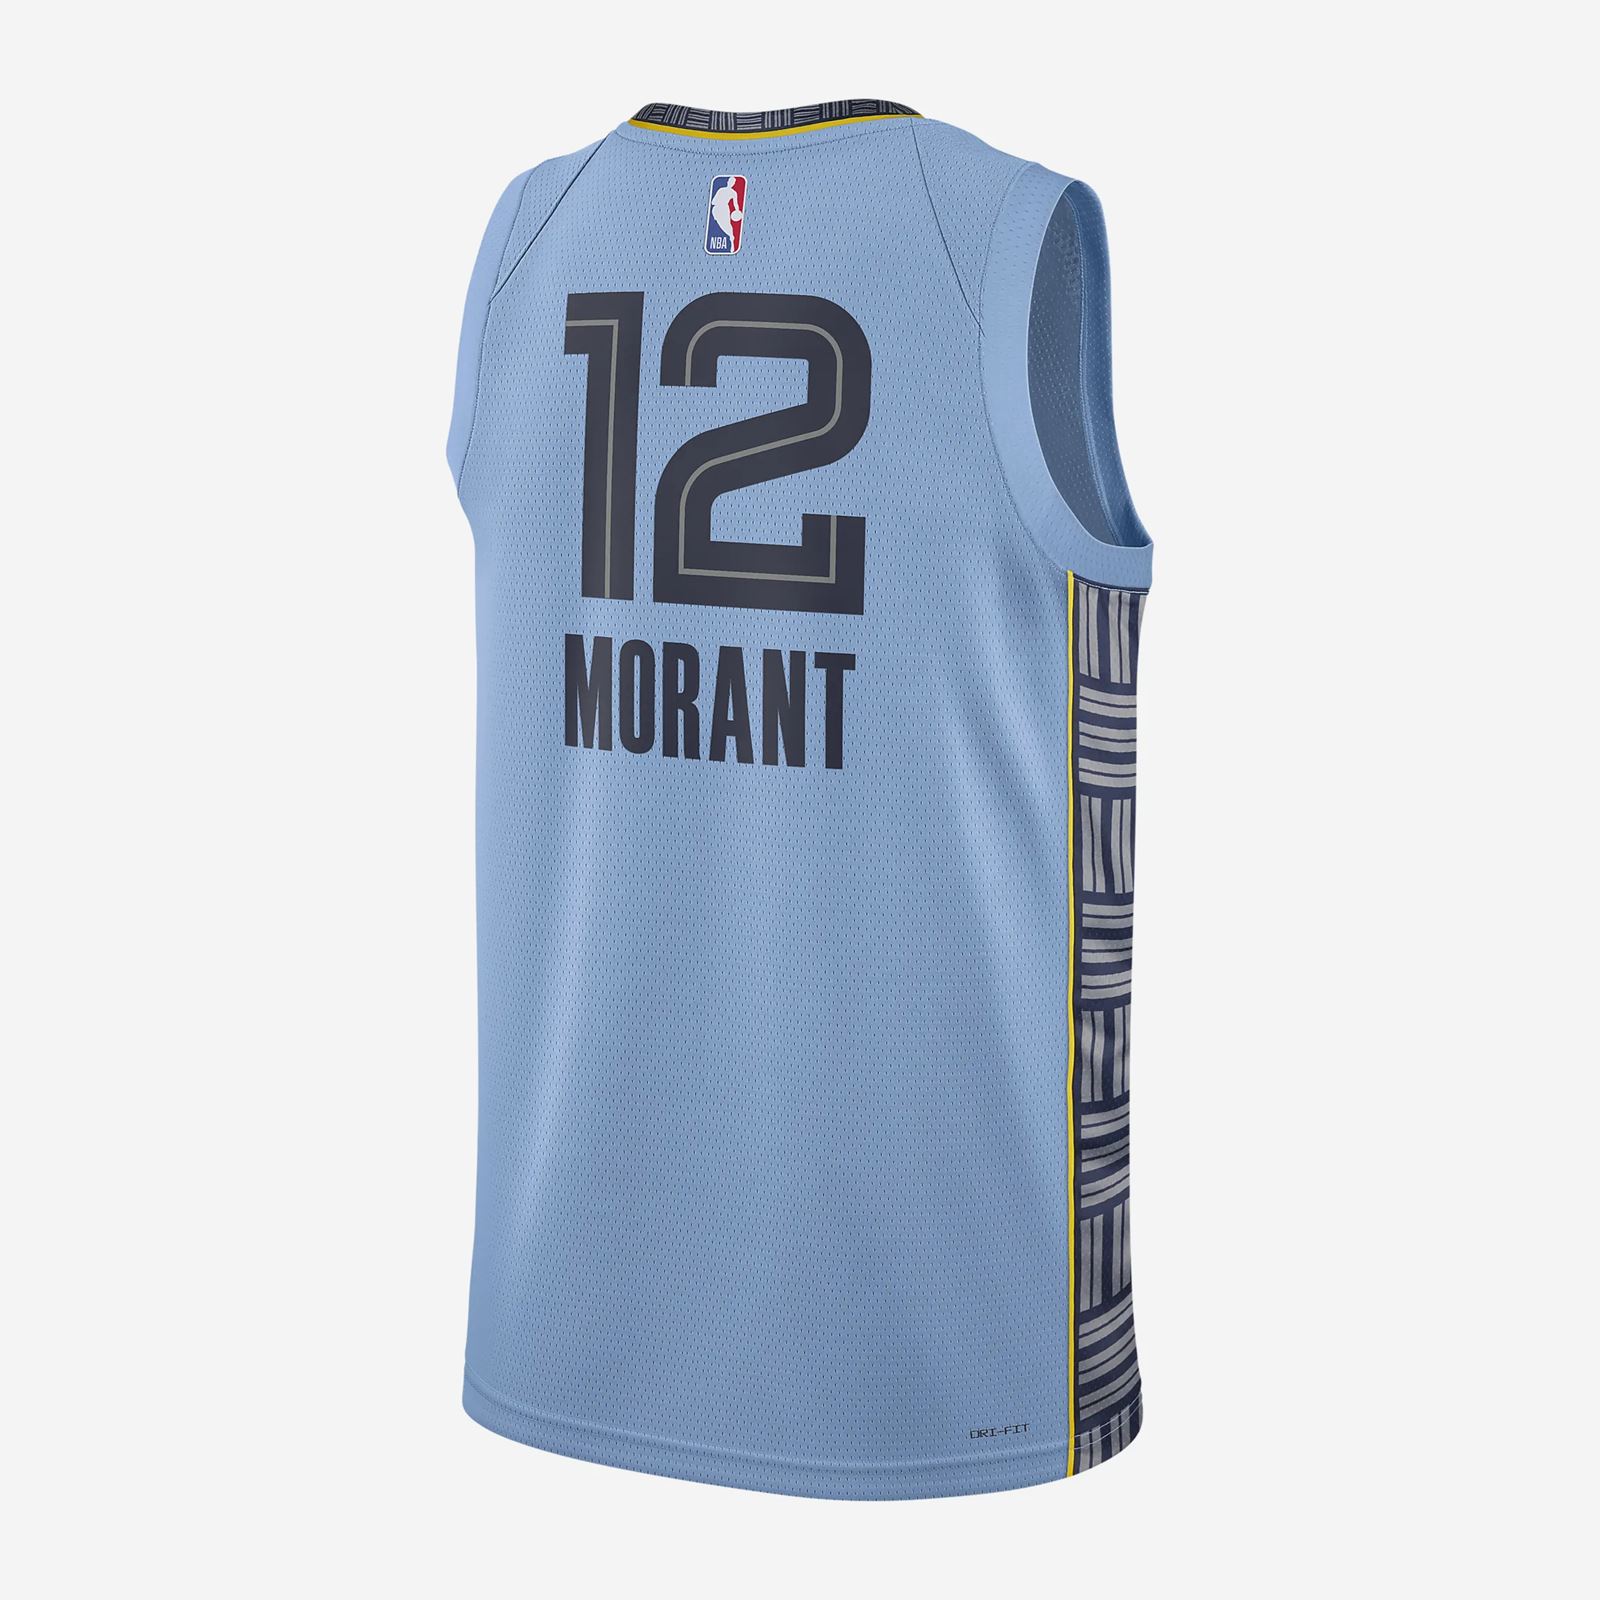 Memphis Grizzlies 2022-23 Statement Jersey Leaked - Spotted For Sale on ...